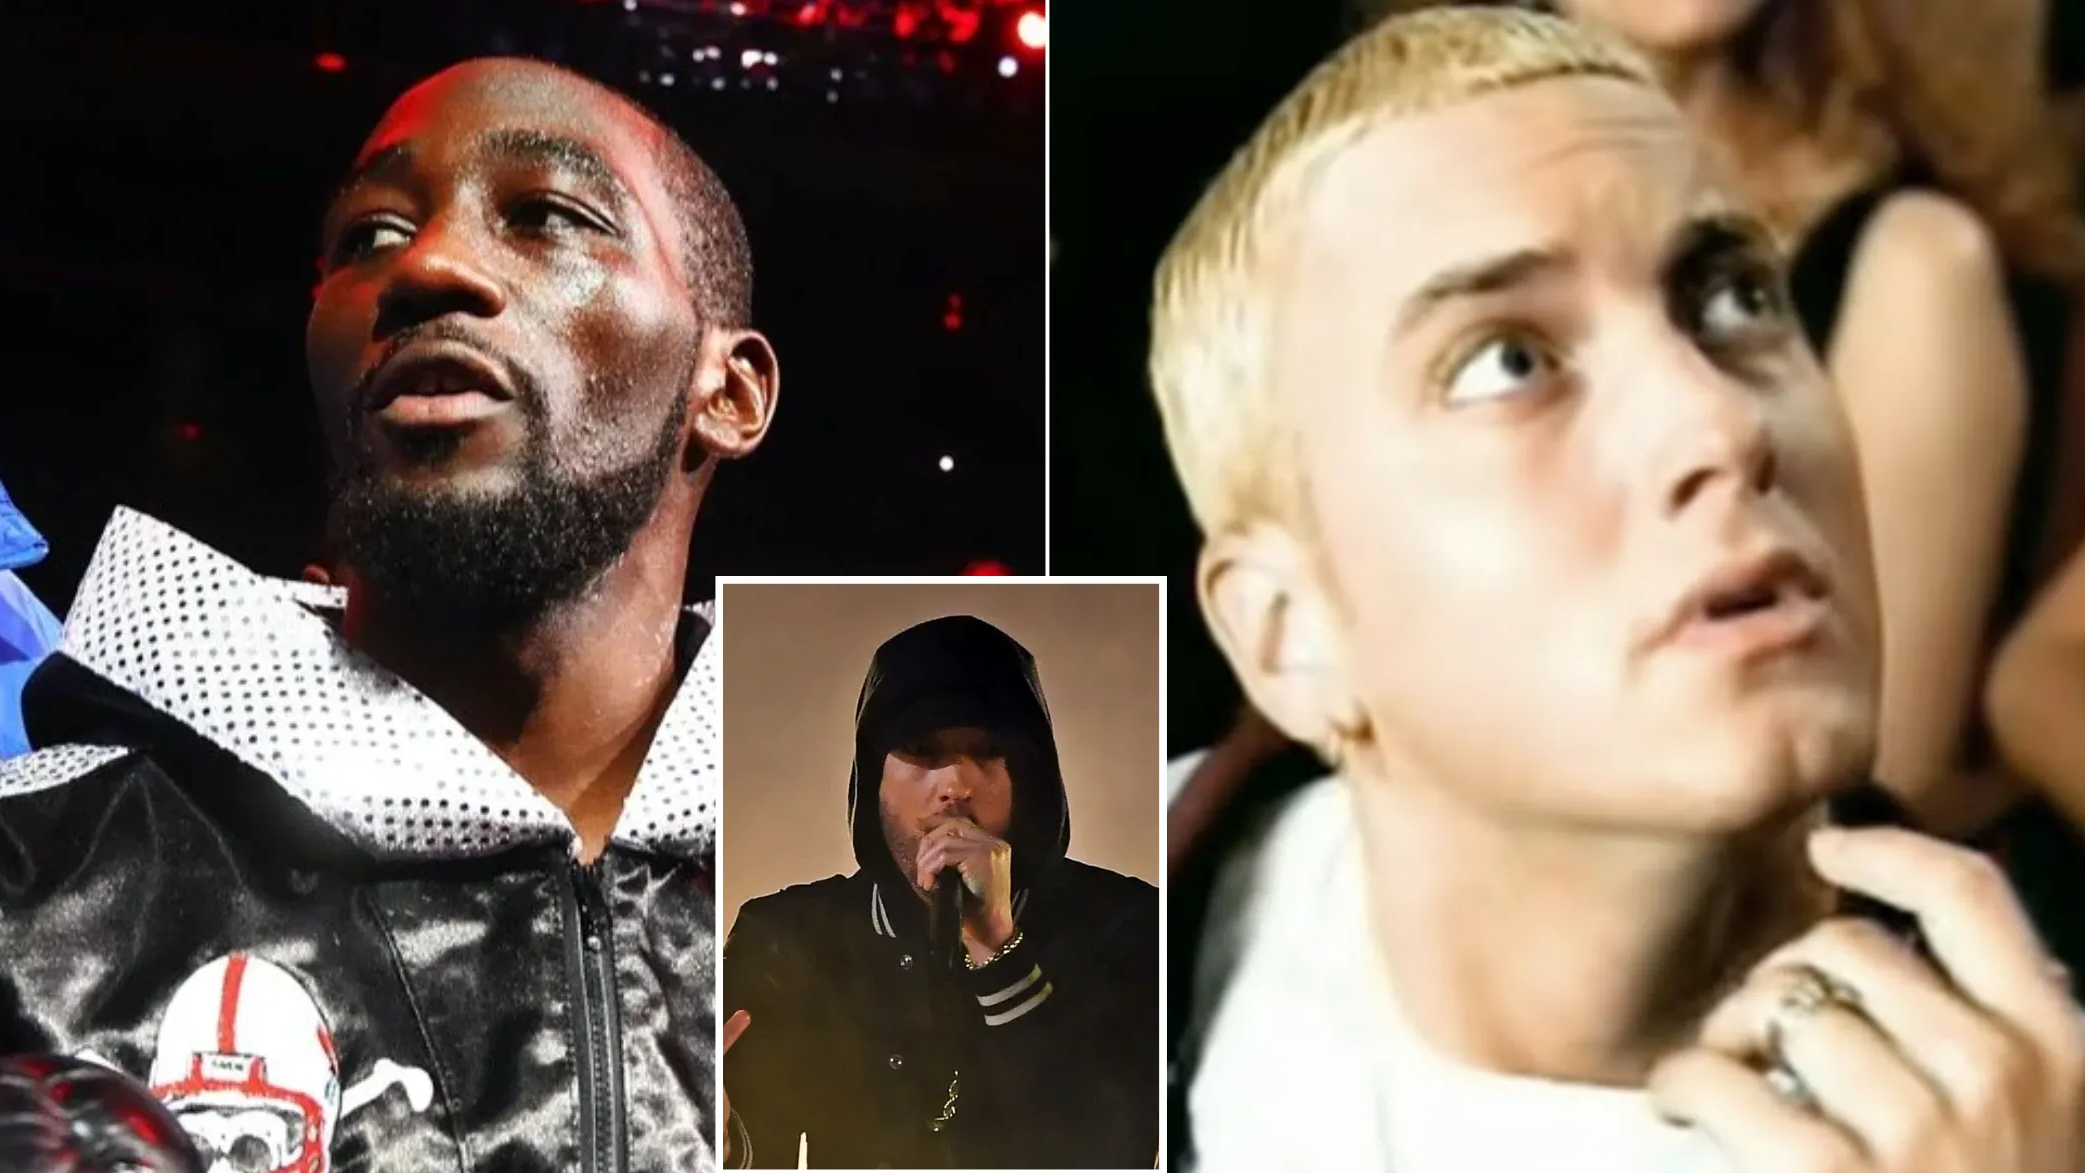 This is crazy' - Eminem set for ring walk with Terence Crawford